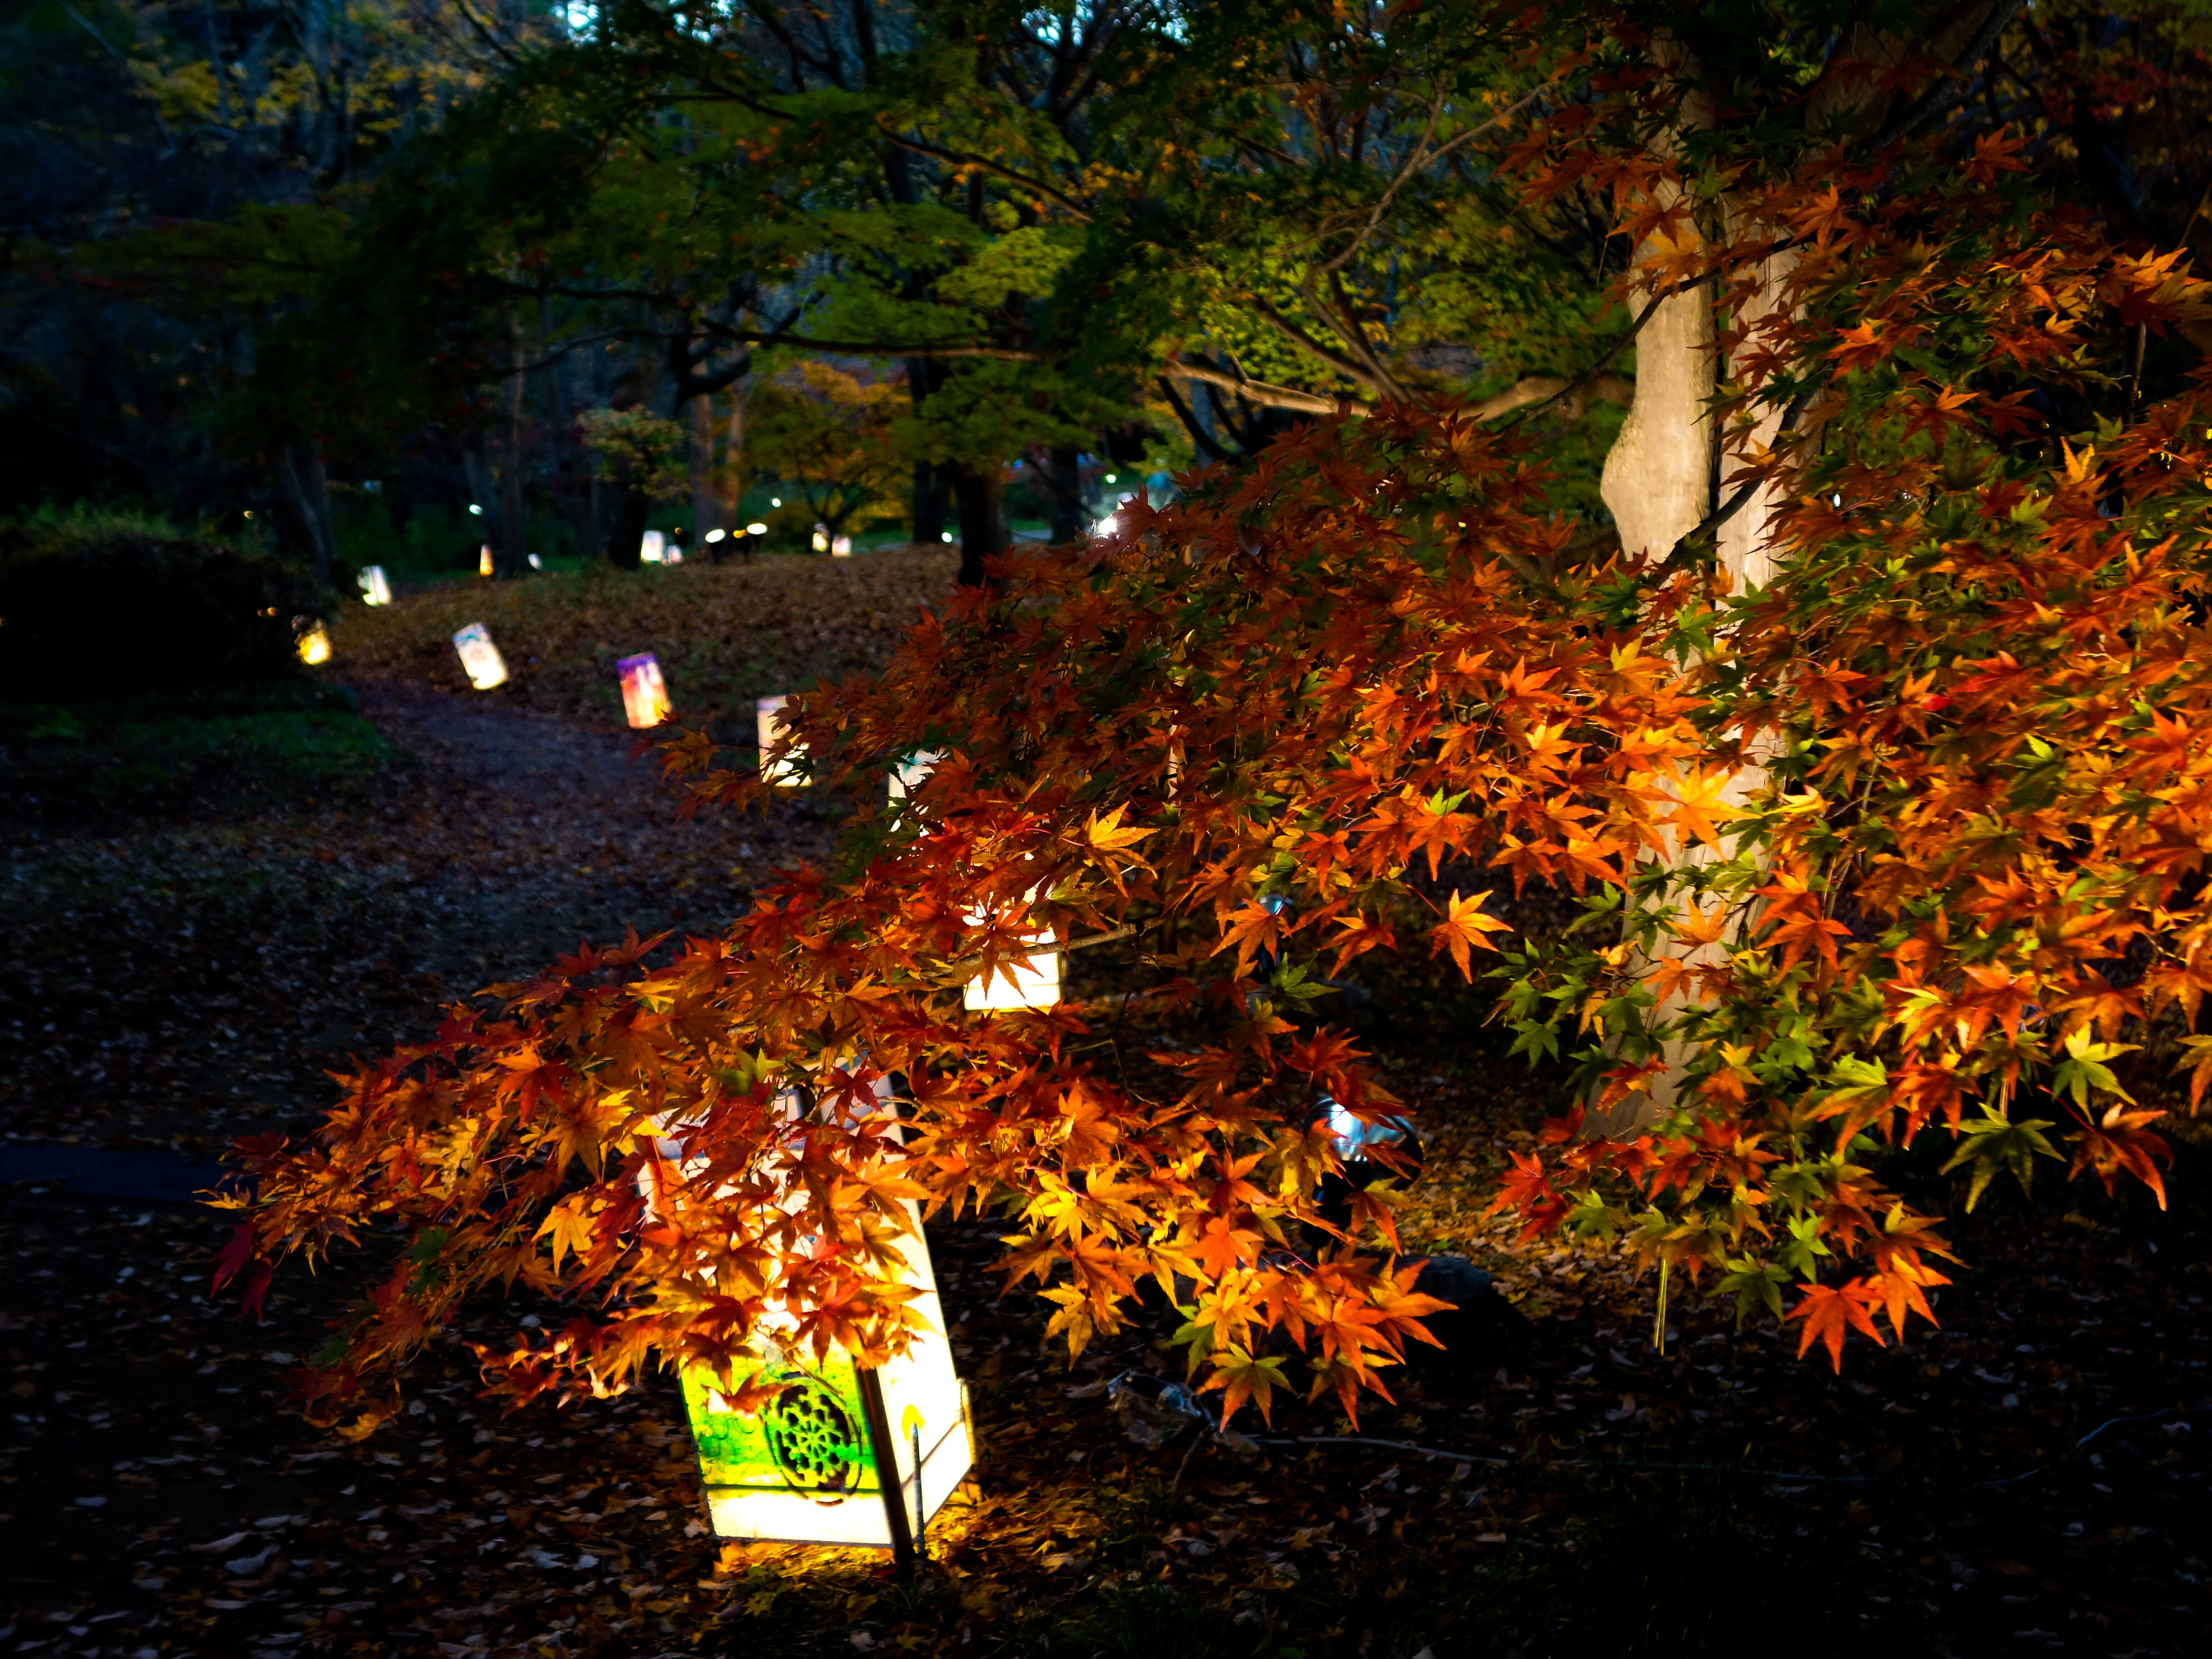 Many lights and colored leaves